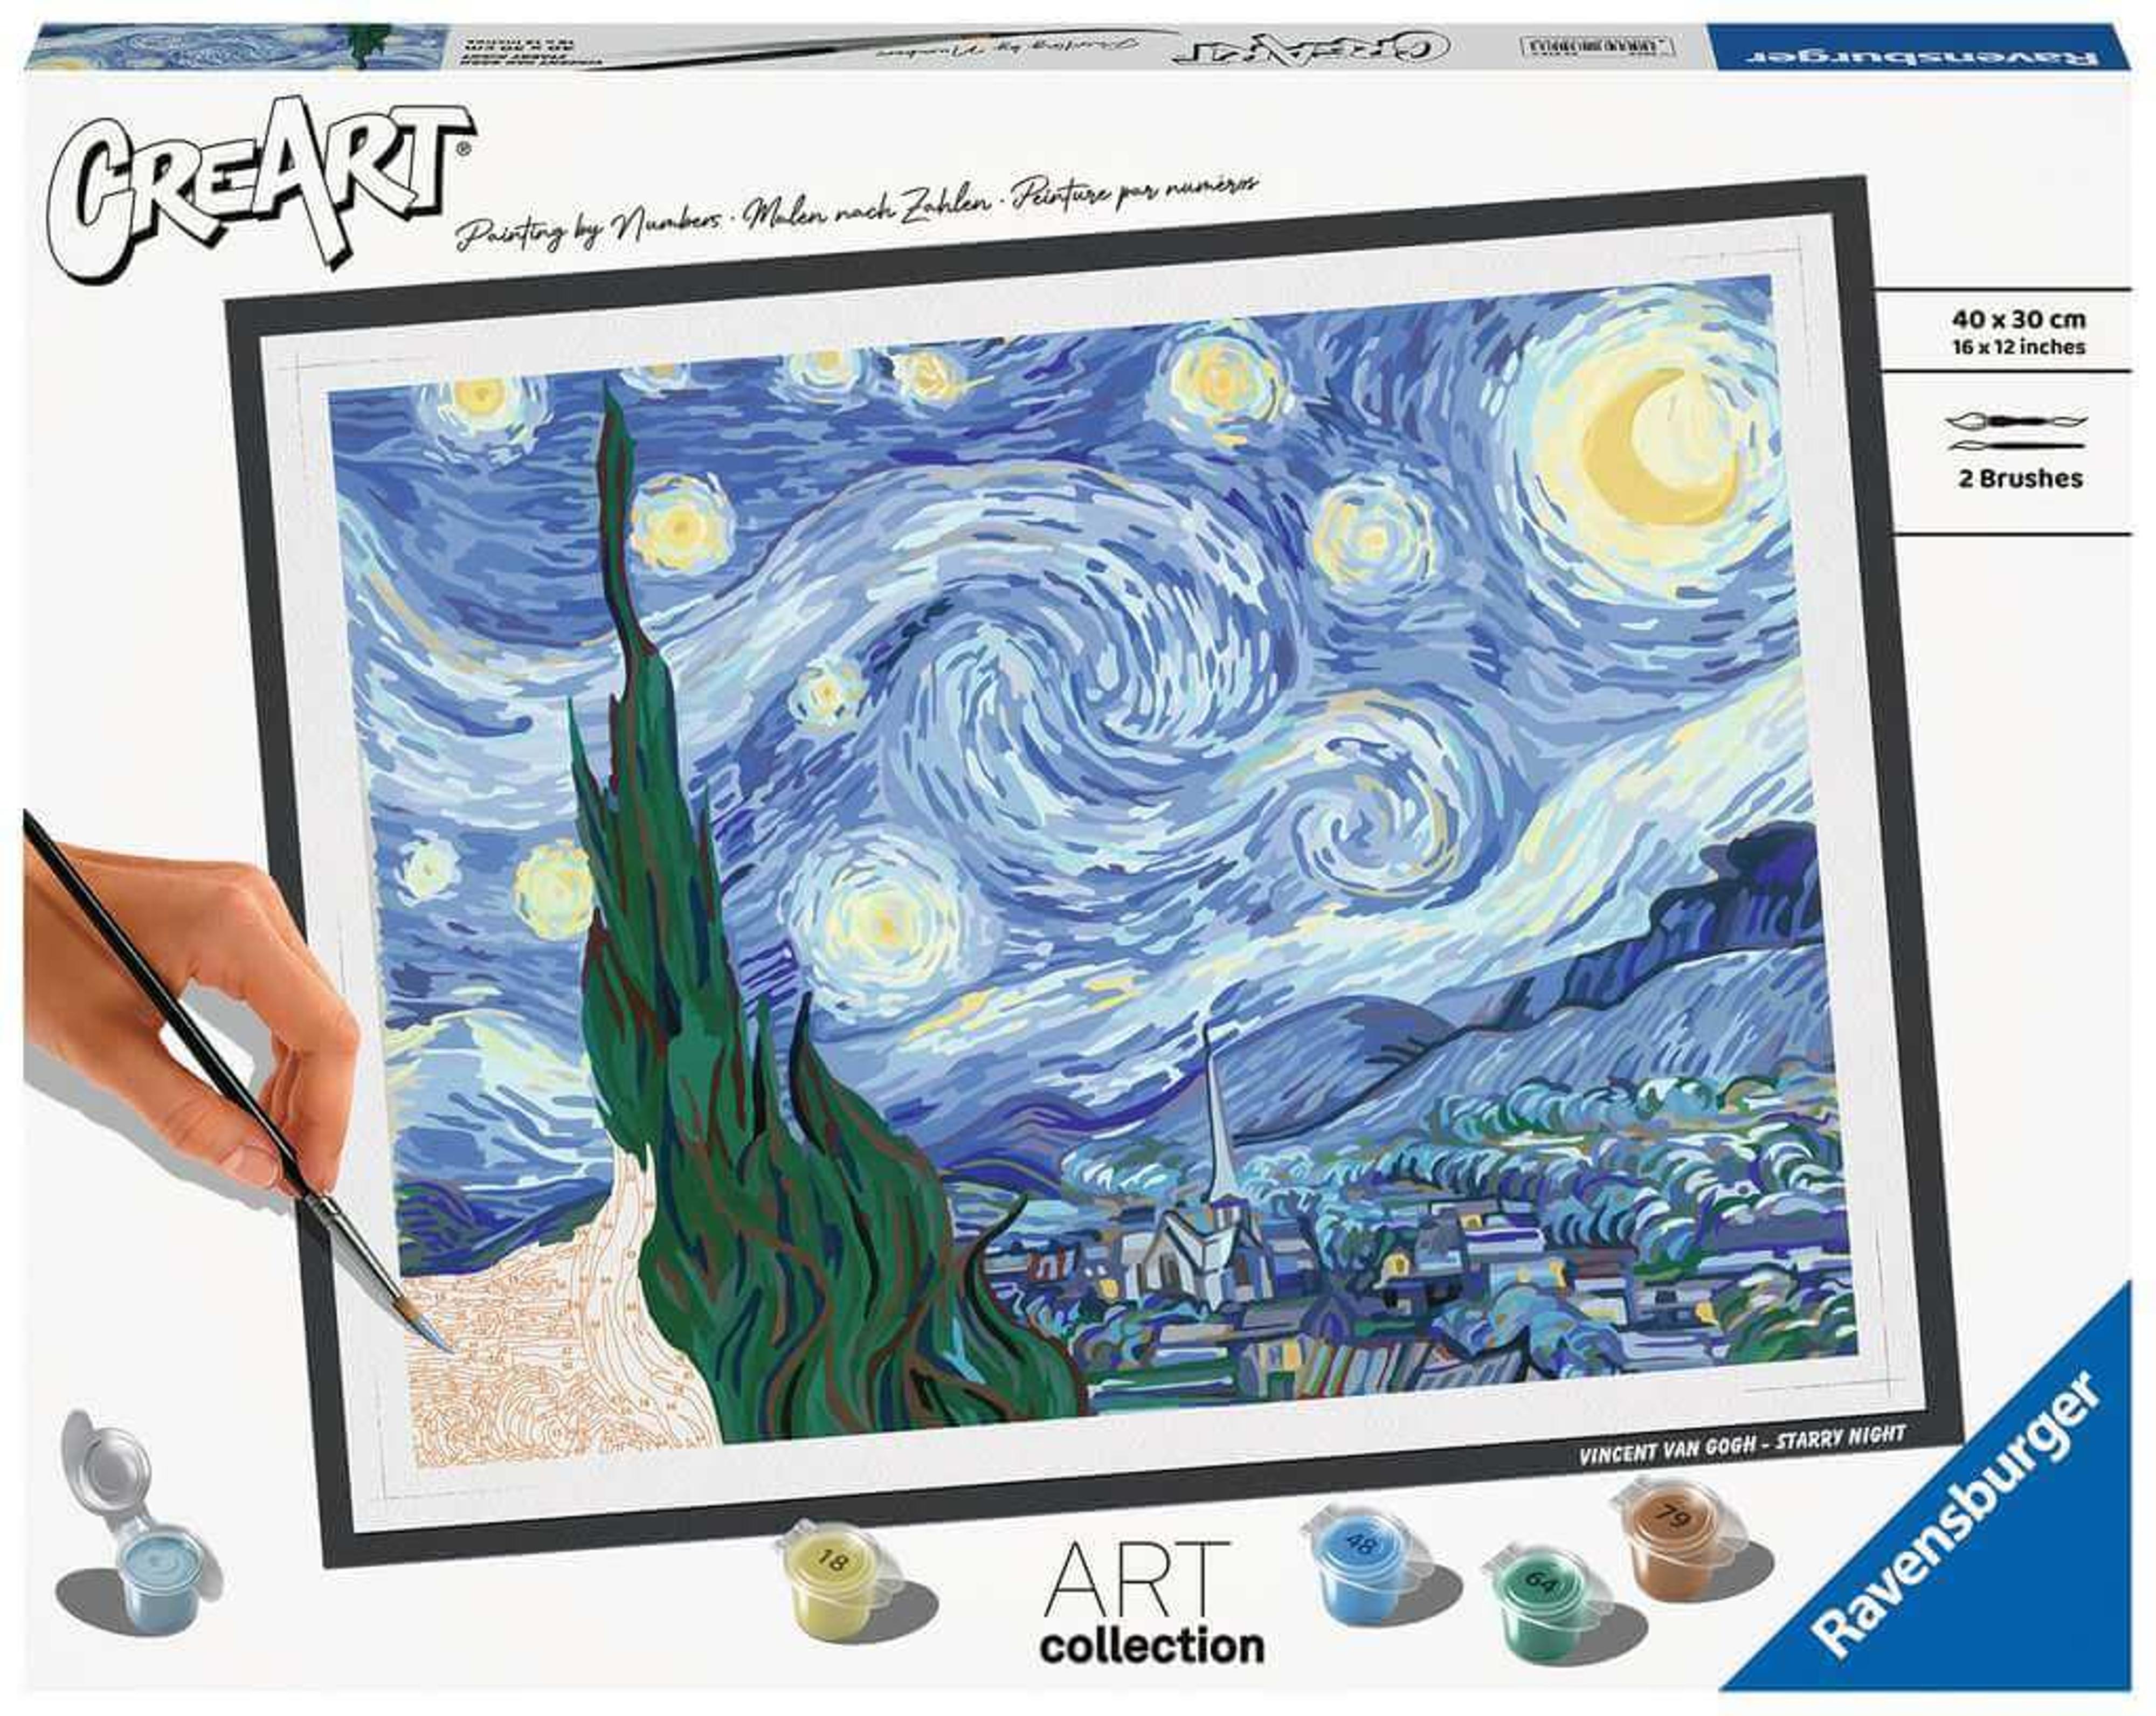 Van Gogh: The Starry Night 12x16 Paint-by-Number